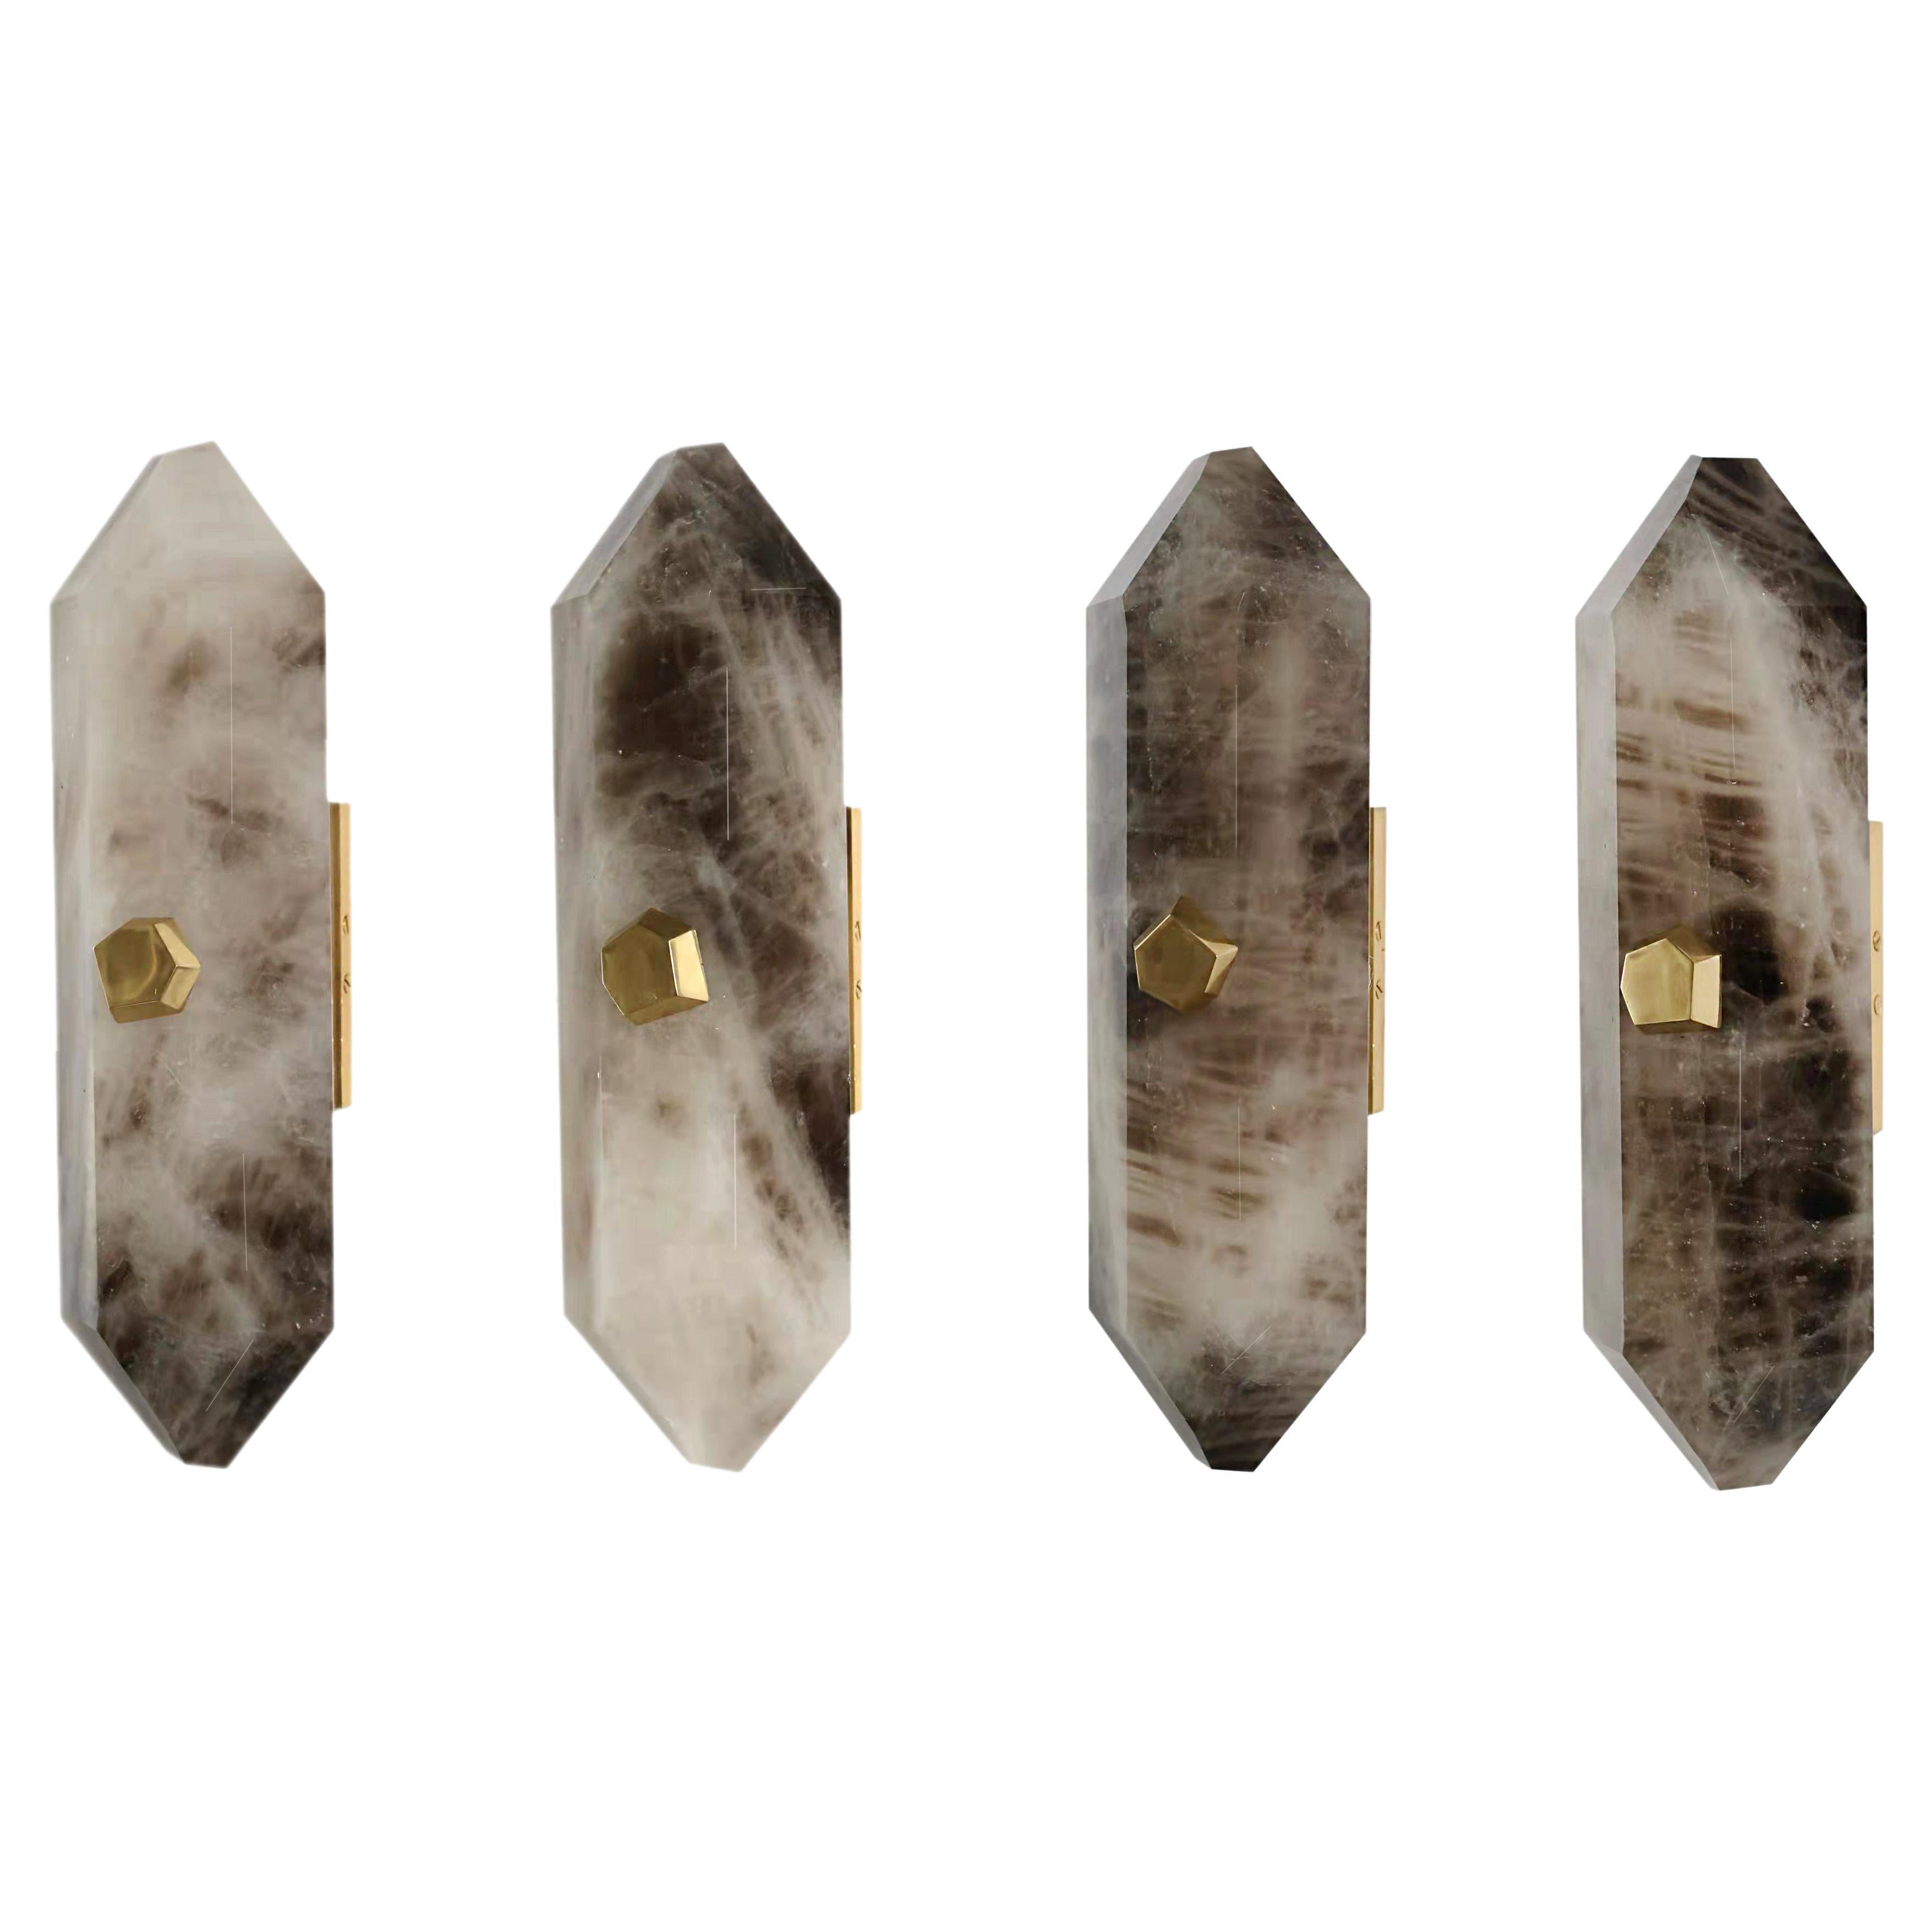 Group of Four Diamond Form Rock Crystal Sconces